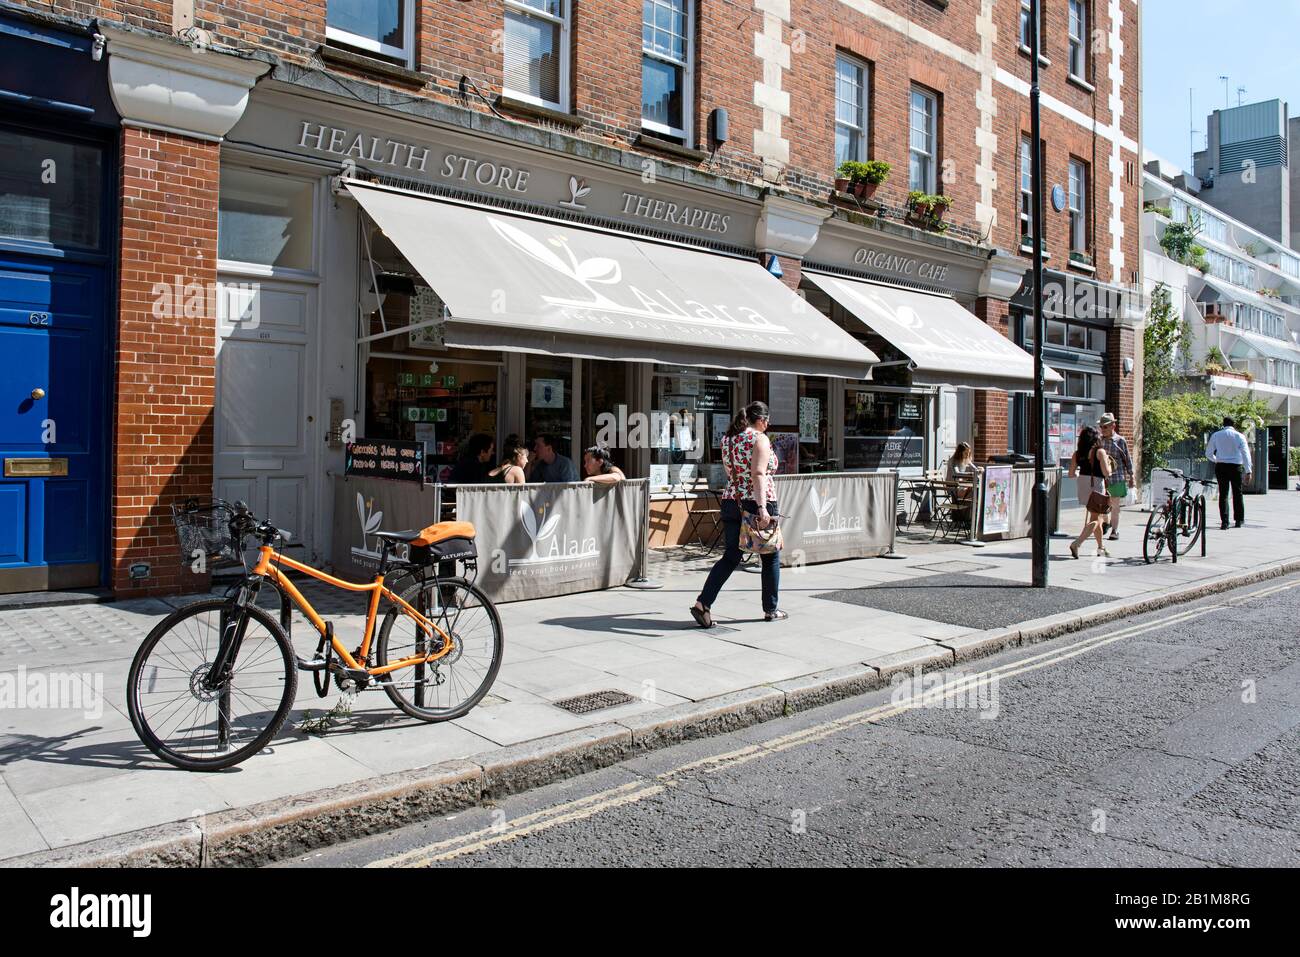 Alara Health Store and Organic Cafe with People Walking Past, Marchmont Street, Bloomsbury, London Stockfoto